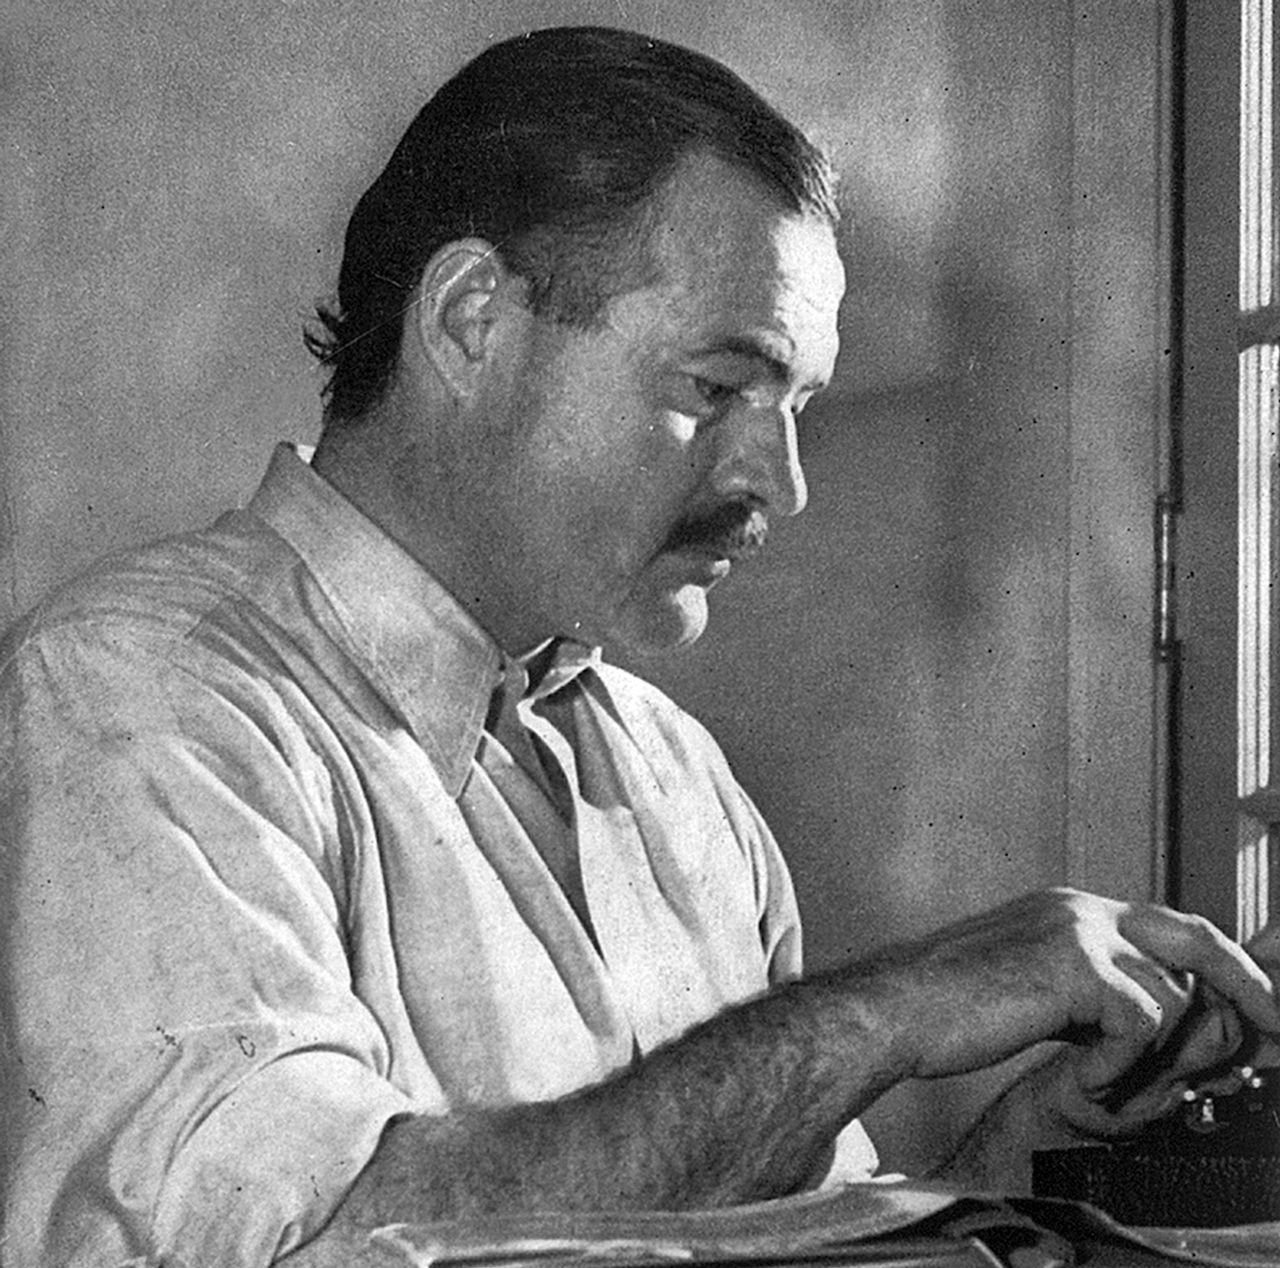 Though best known for his novels and short stories, Ernest Hemingway also wrote poetry. Photo courtesy of the Ernest Hemingway Photographs Collection; John F. Kennedy Presidential Library and Museum, Boston